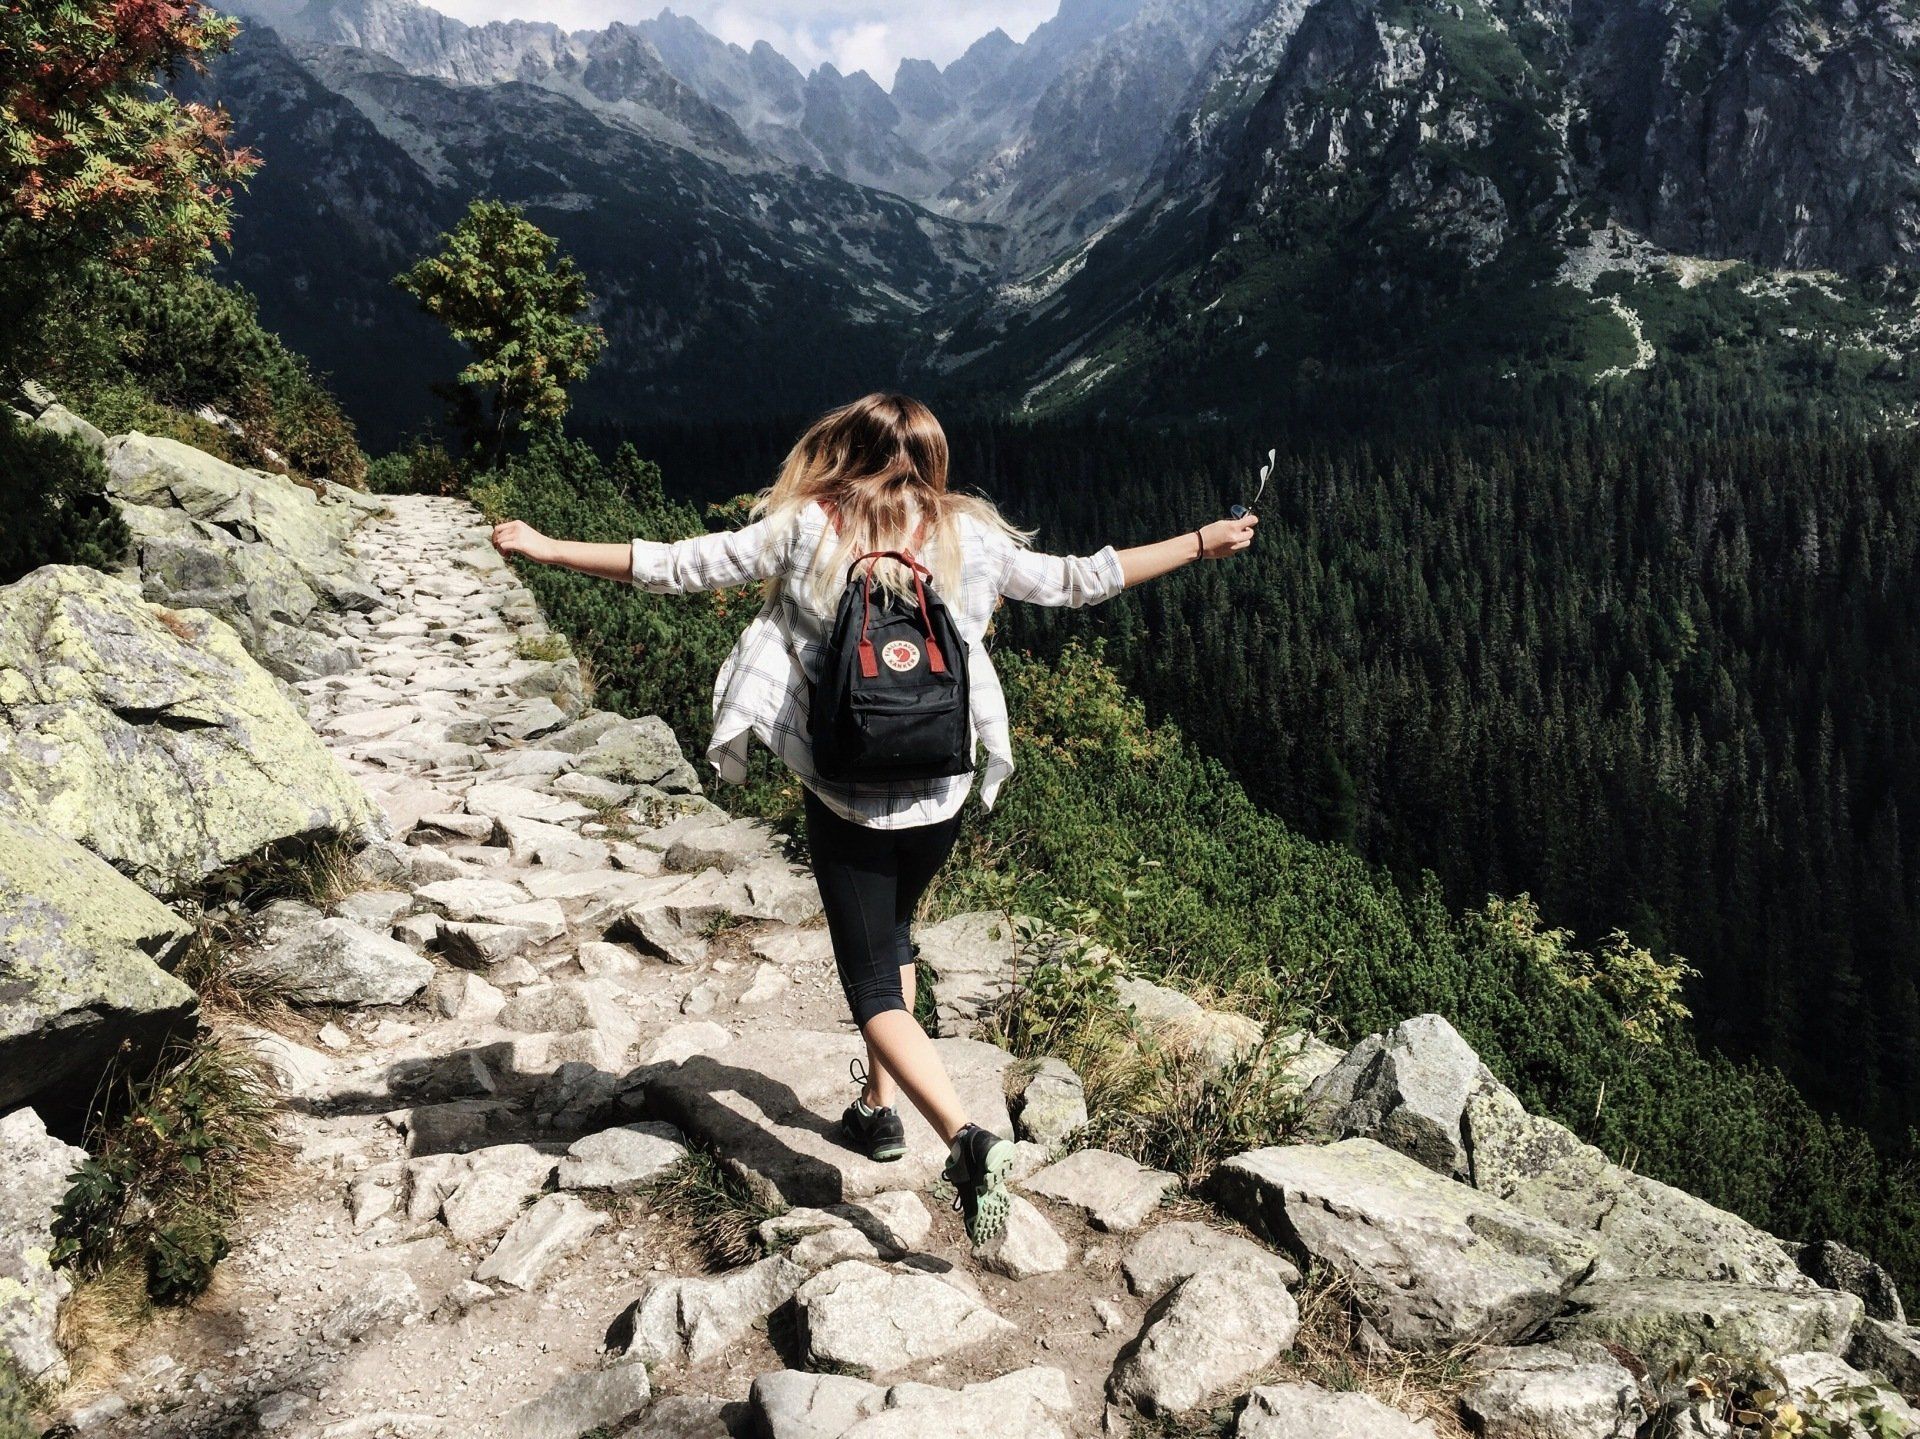 a woman with a backpack is walking on a rocky path in the mountains .